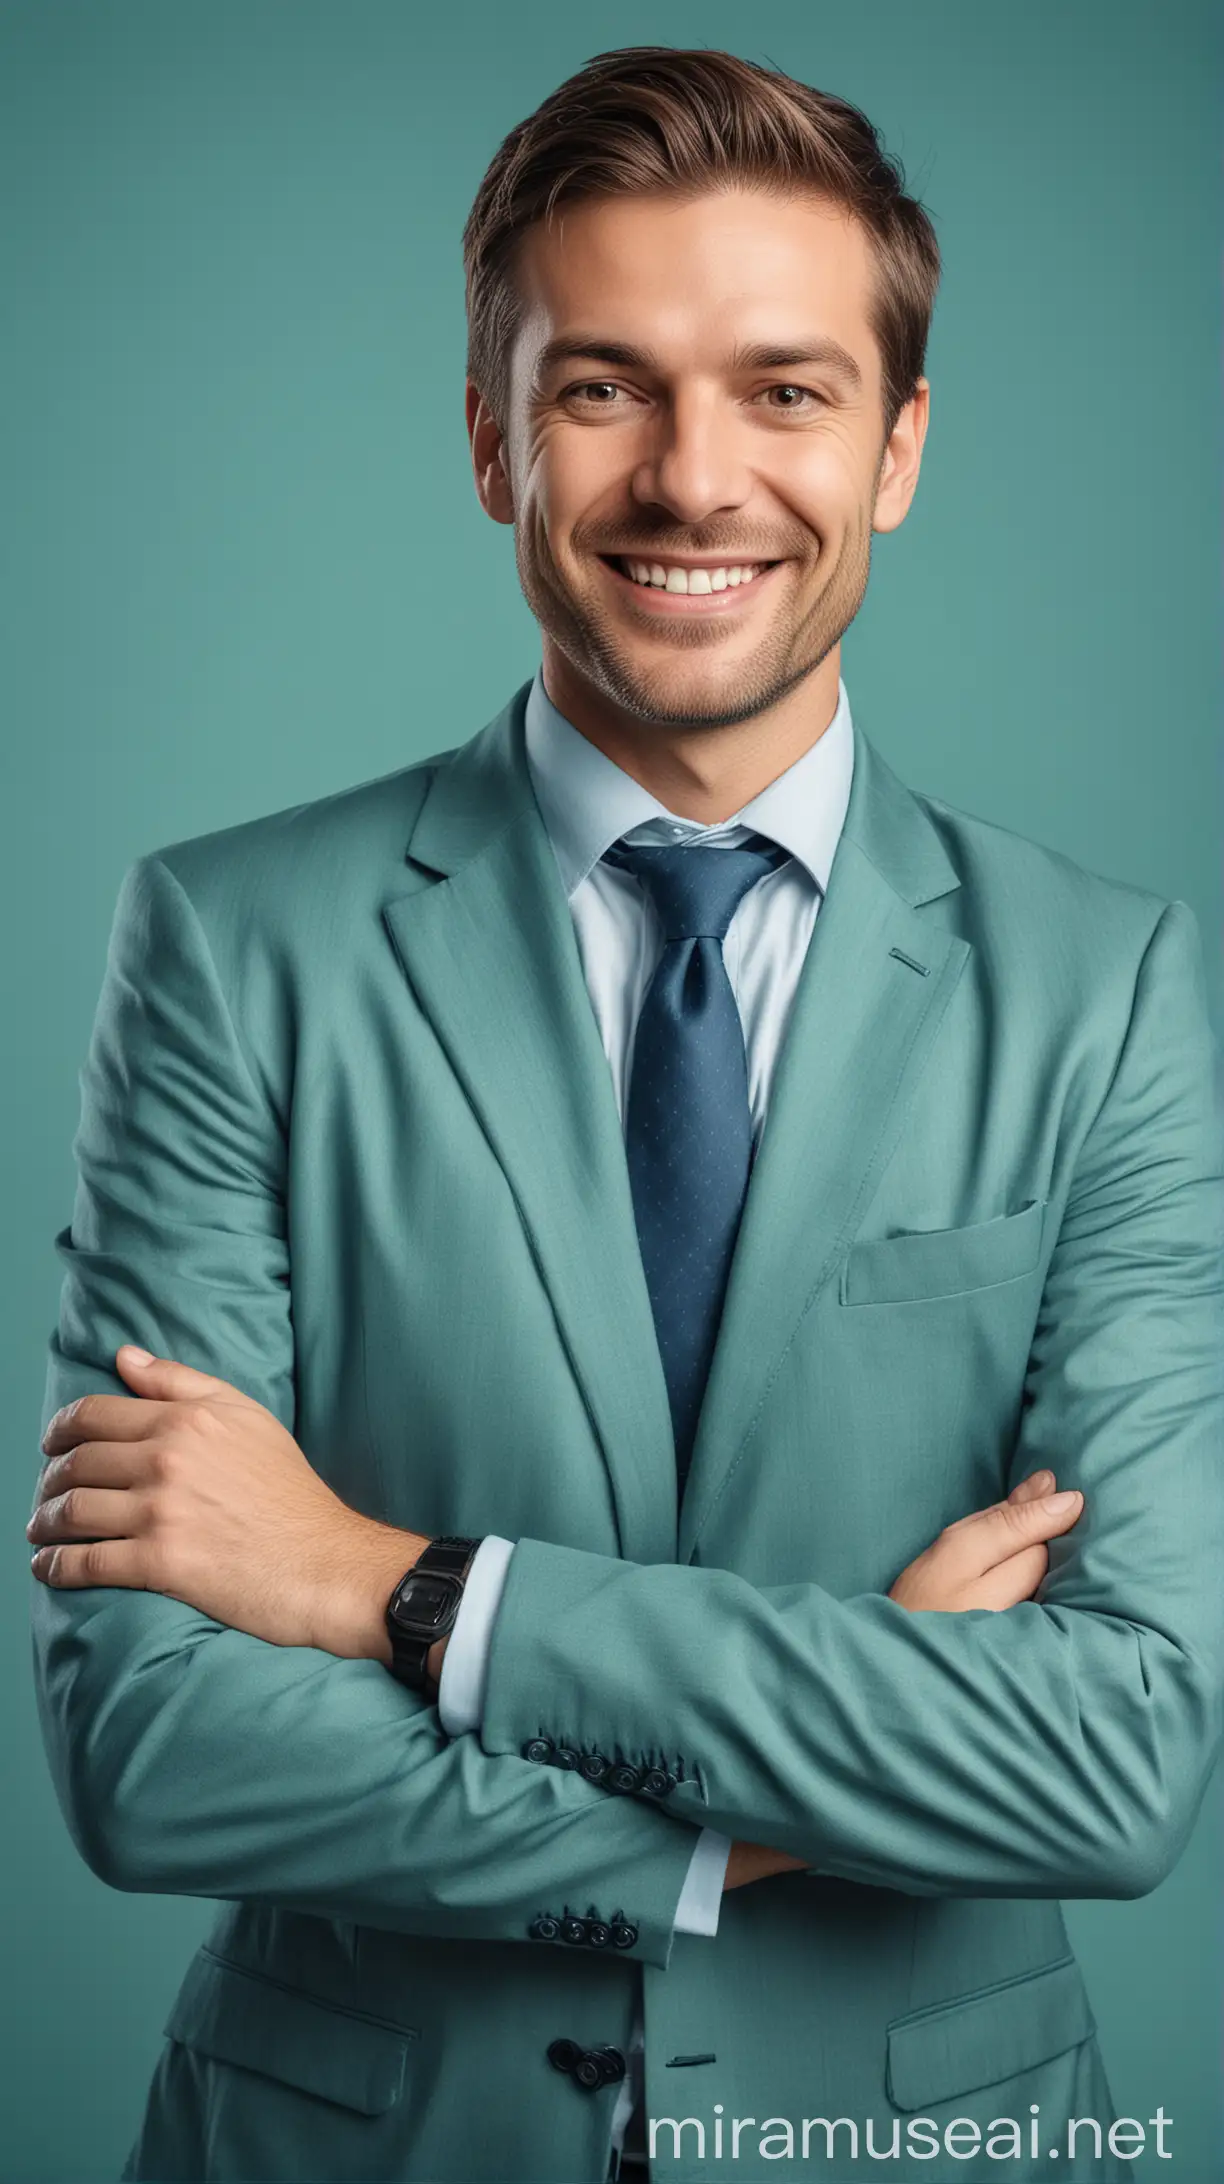 Smiling Commercial Real Estate Investor with Arms Crossed in GreenishBlue Setting